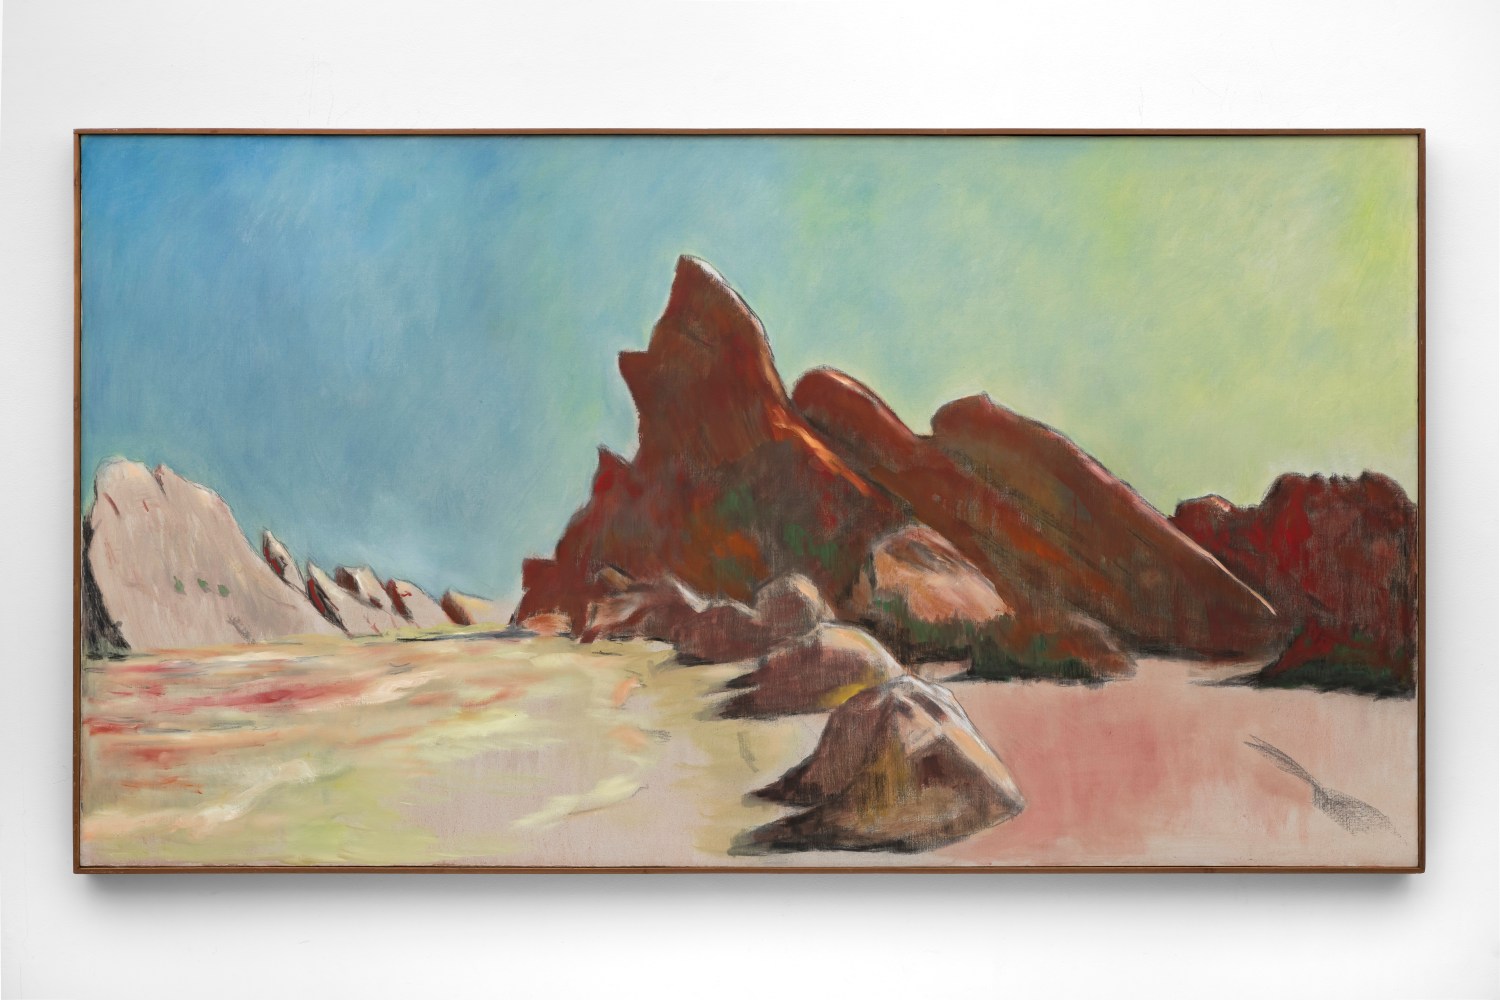 Frederick Wight (1902-1986) Vasquez Rocks, 1980  oil on canvas 46 x 84 inches;  116.8 x 213.4 centimeters LSFA# 10650